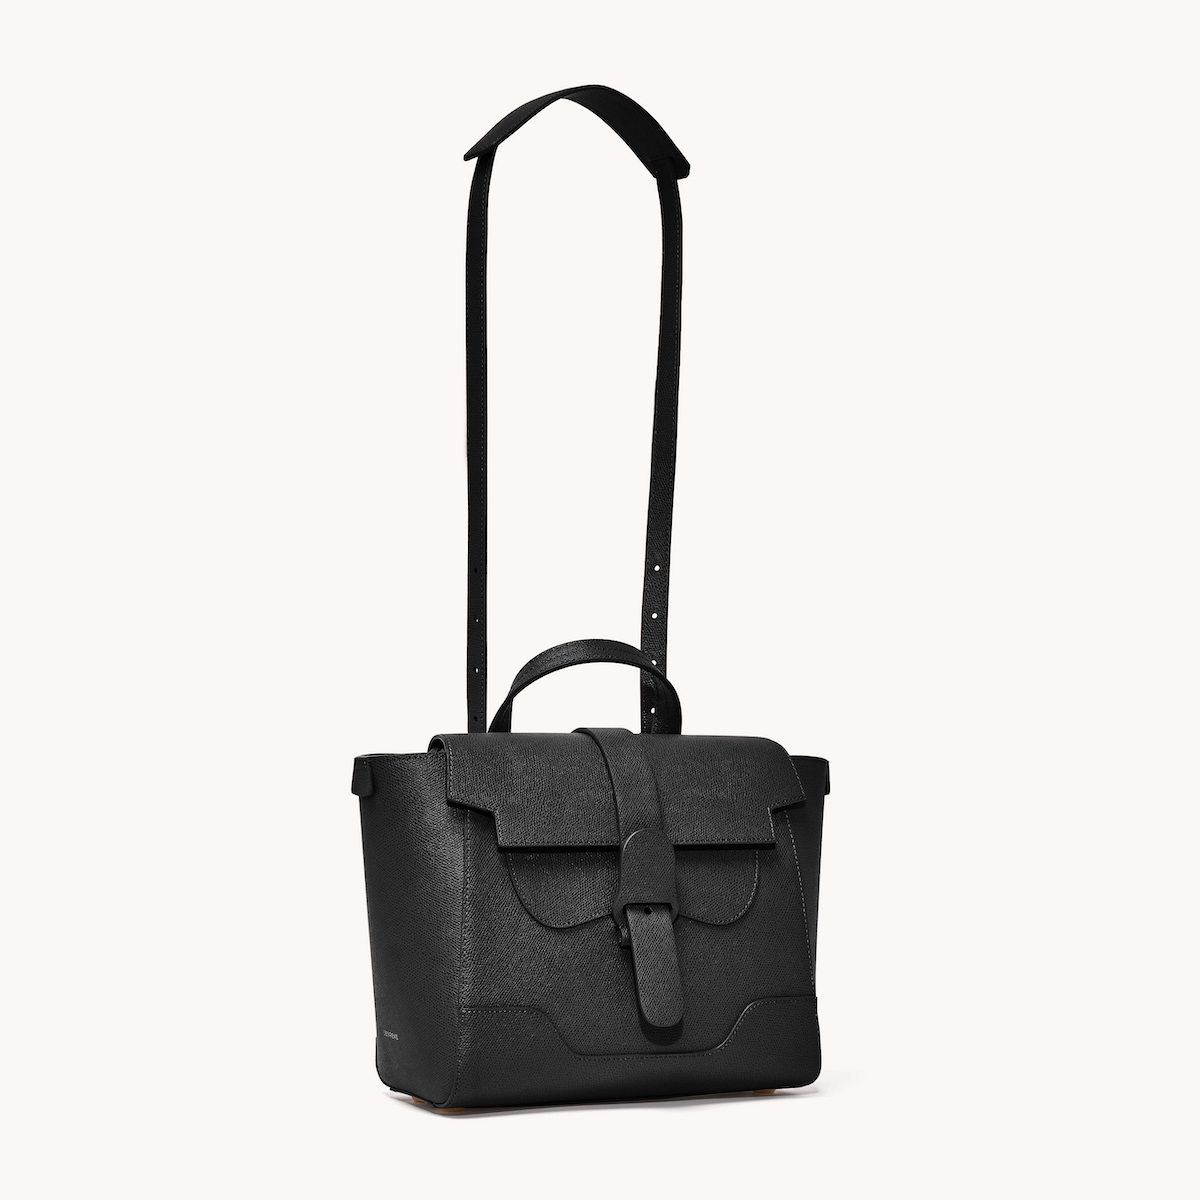 Midi Maestra Bag Pebbled Noir with Gold Hardware Front View with Long Strap